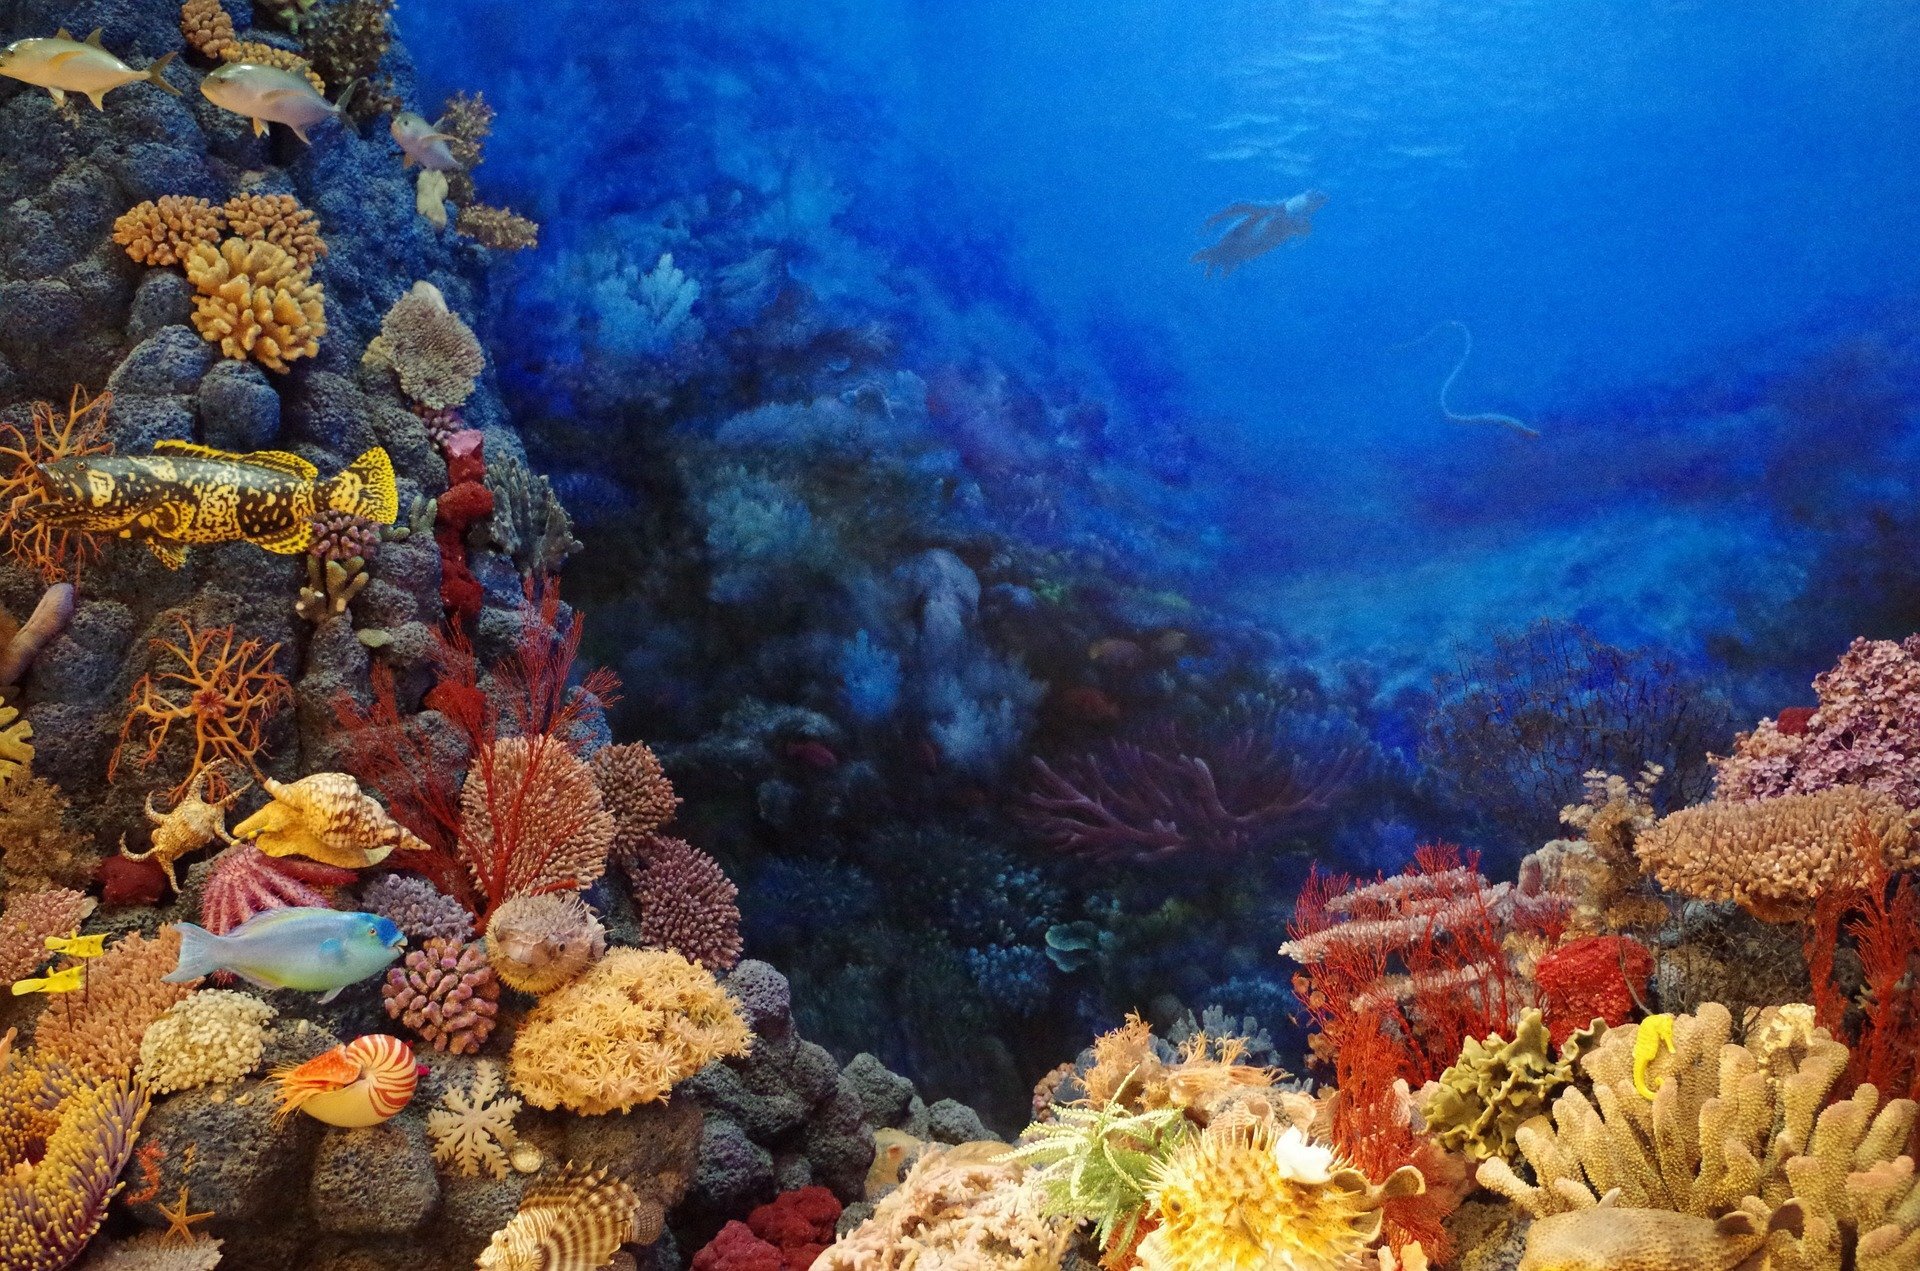 Three key habitat-building corals face worrying future due to climate crisis